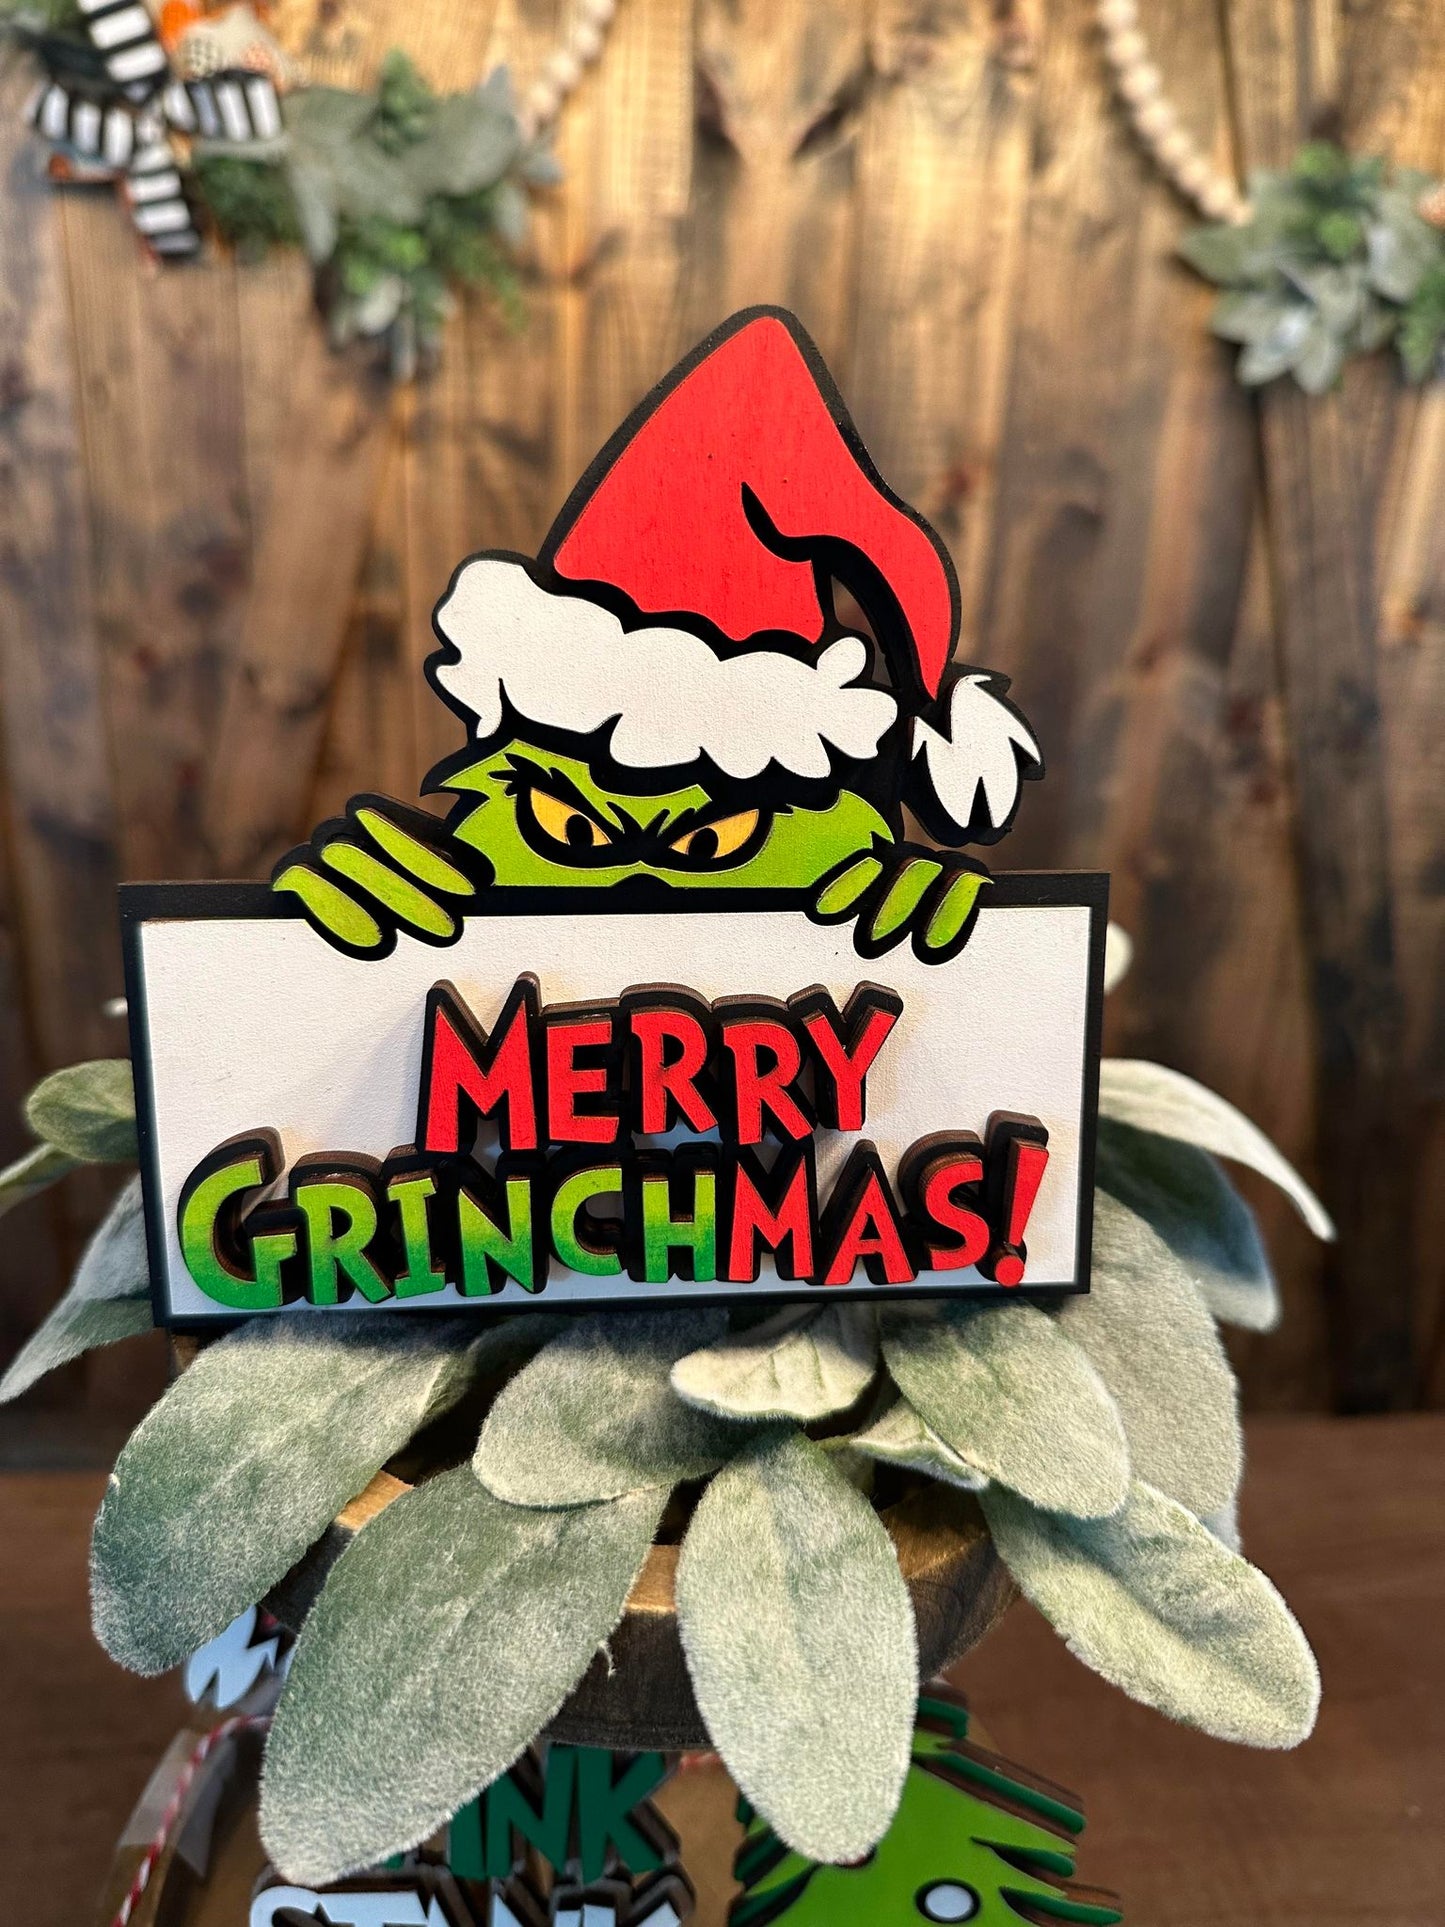 3D Tiered Tray Decor - Mean one - Merry Grinchmas